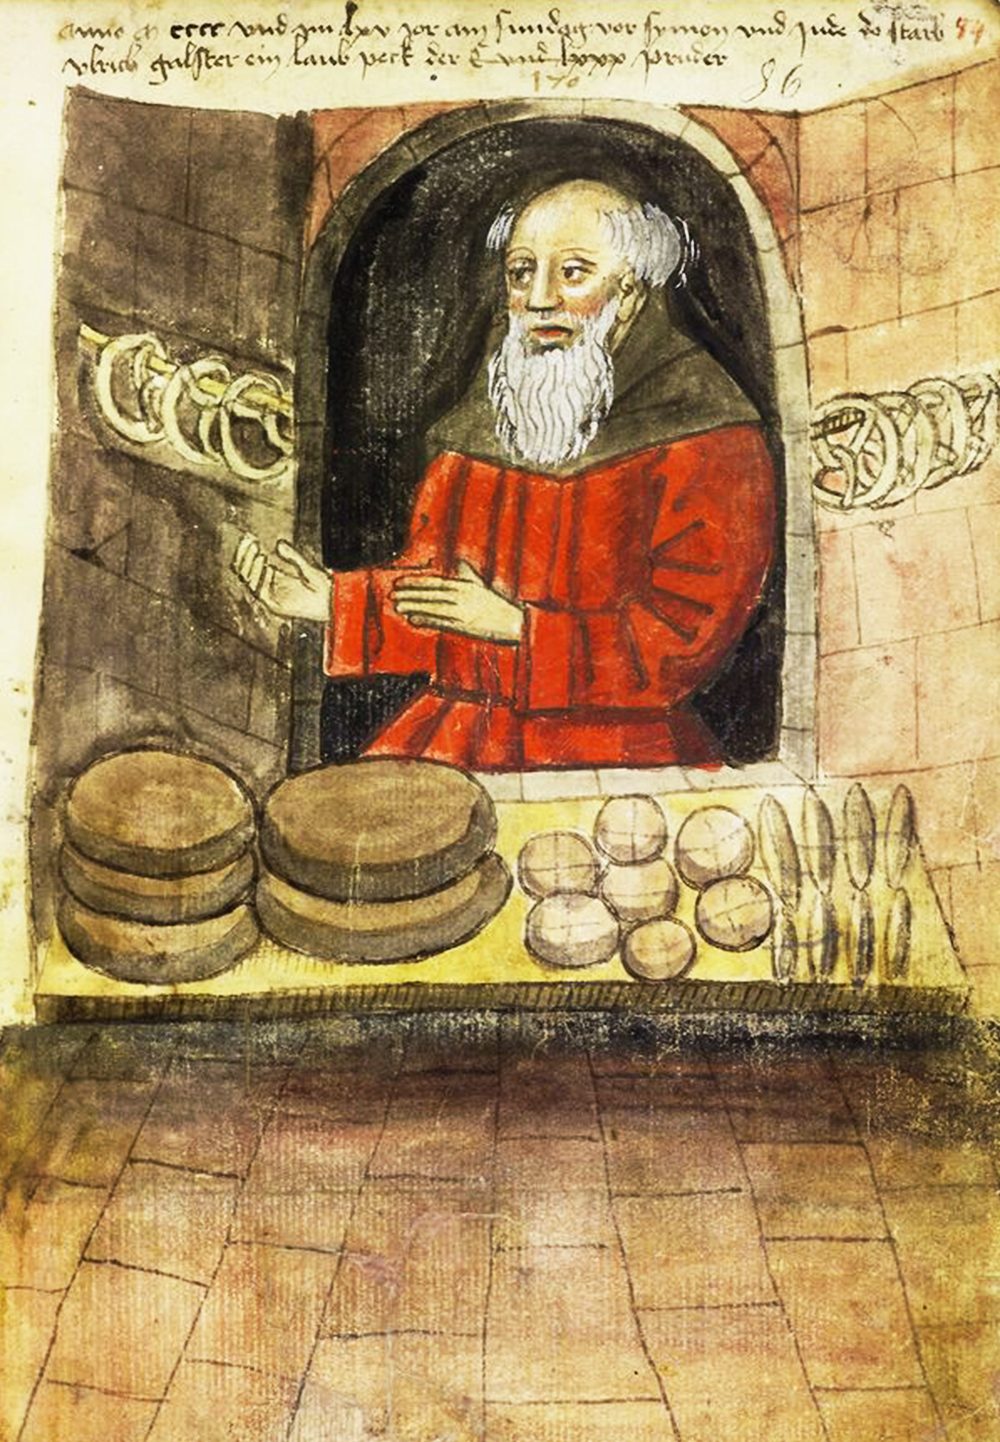 This medieval painting depicts an elderly man wearing a red robe looking out of a bakery window. His baked goods are placed on a shelf outside of the window.